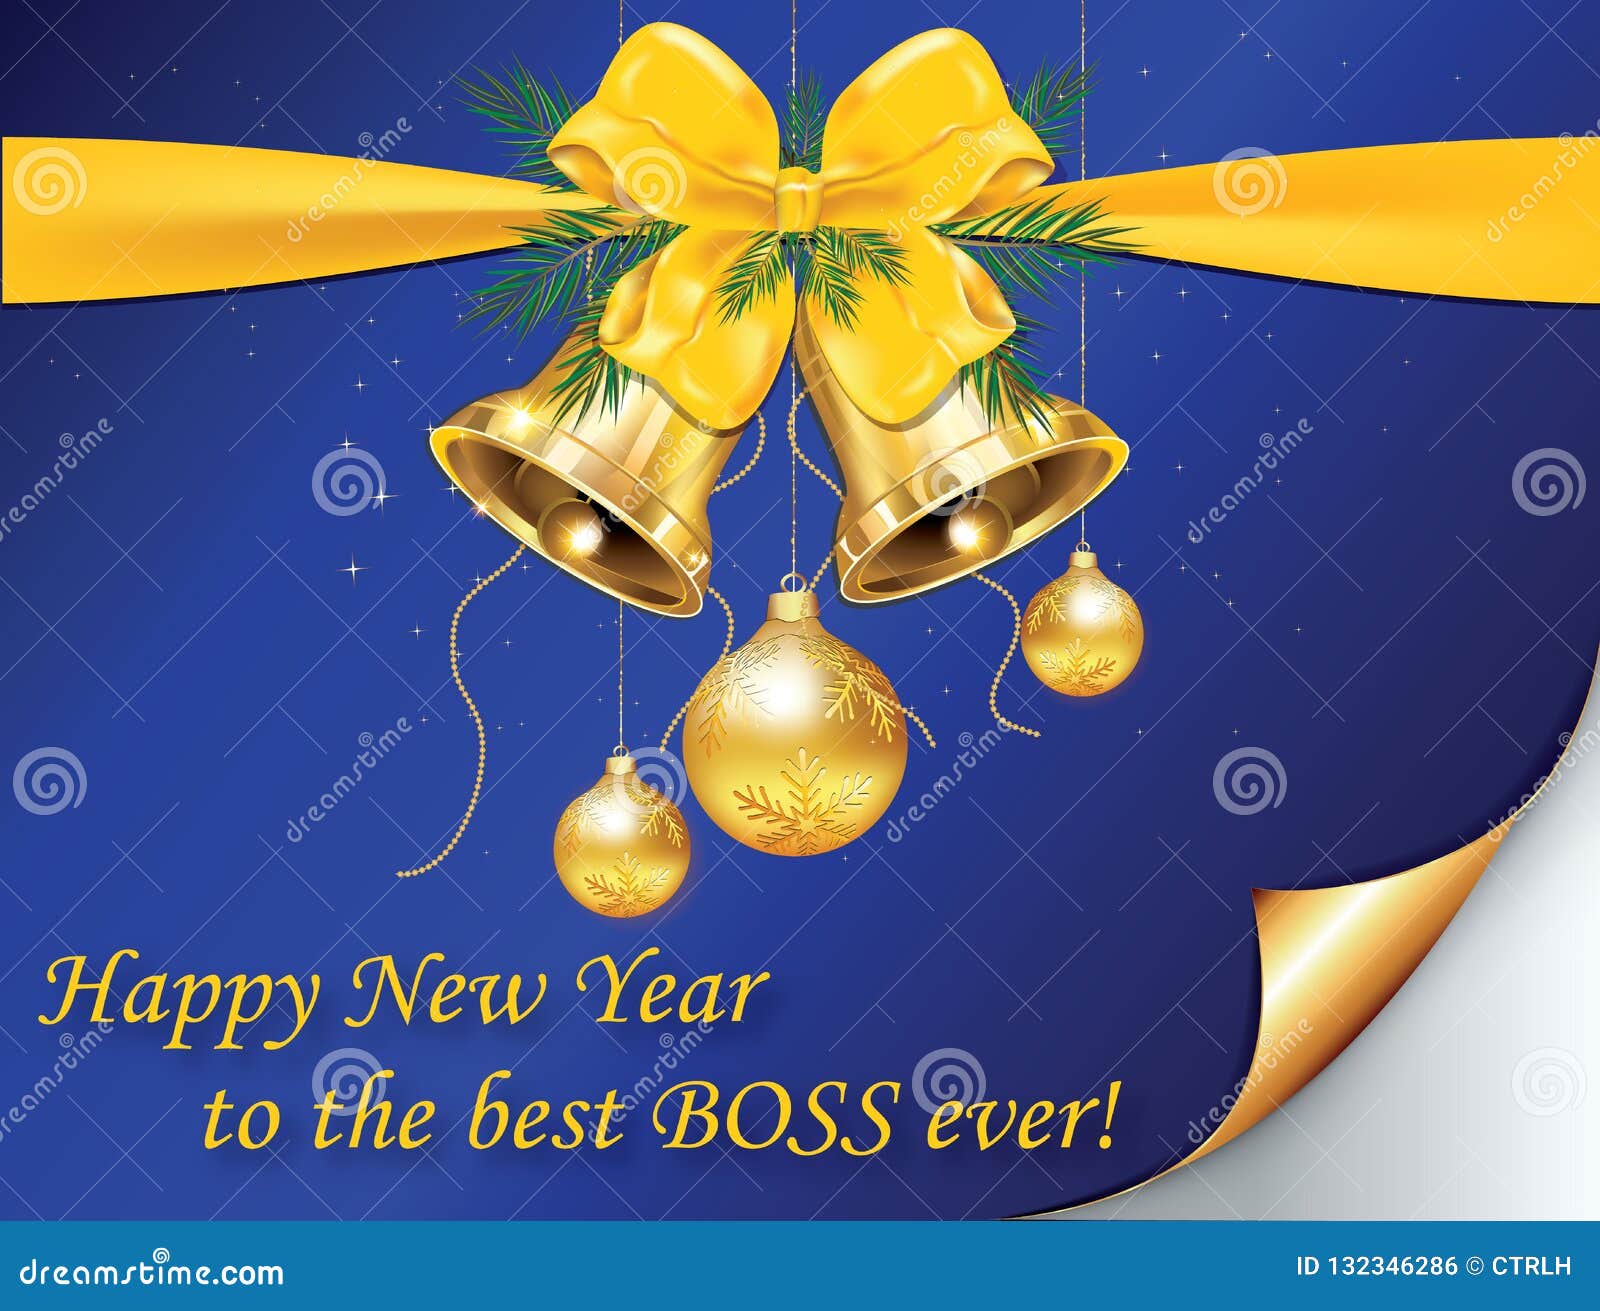 New Year Greetings For Boss